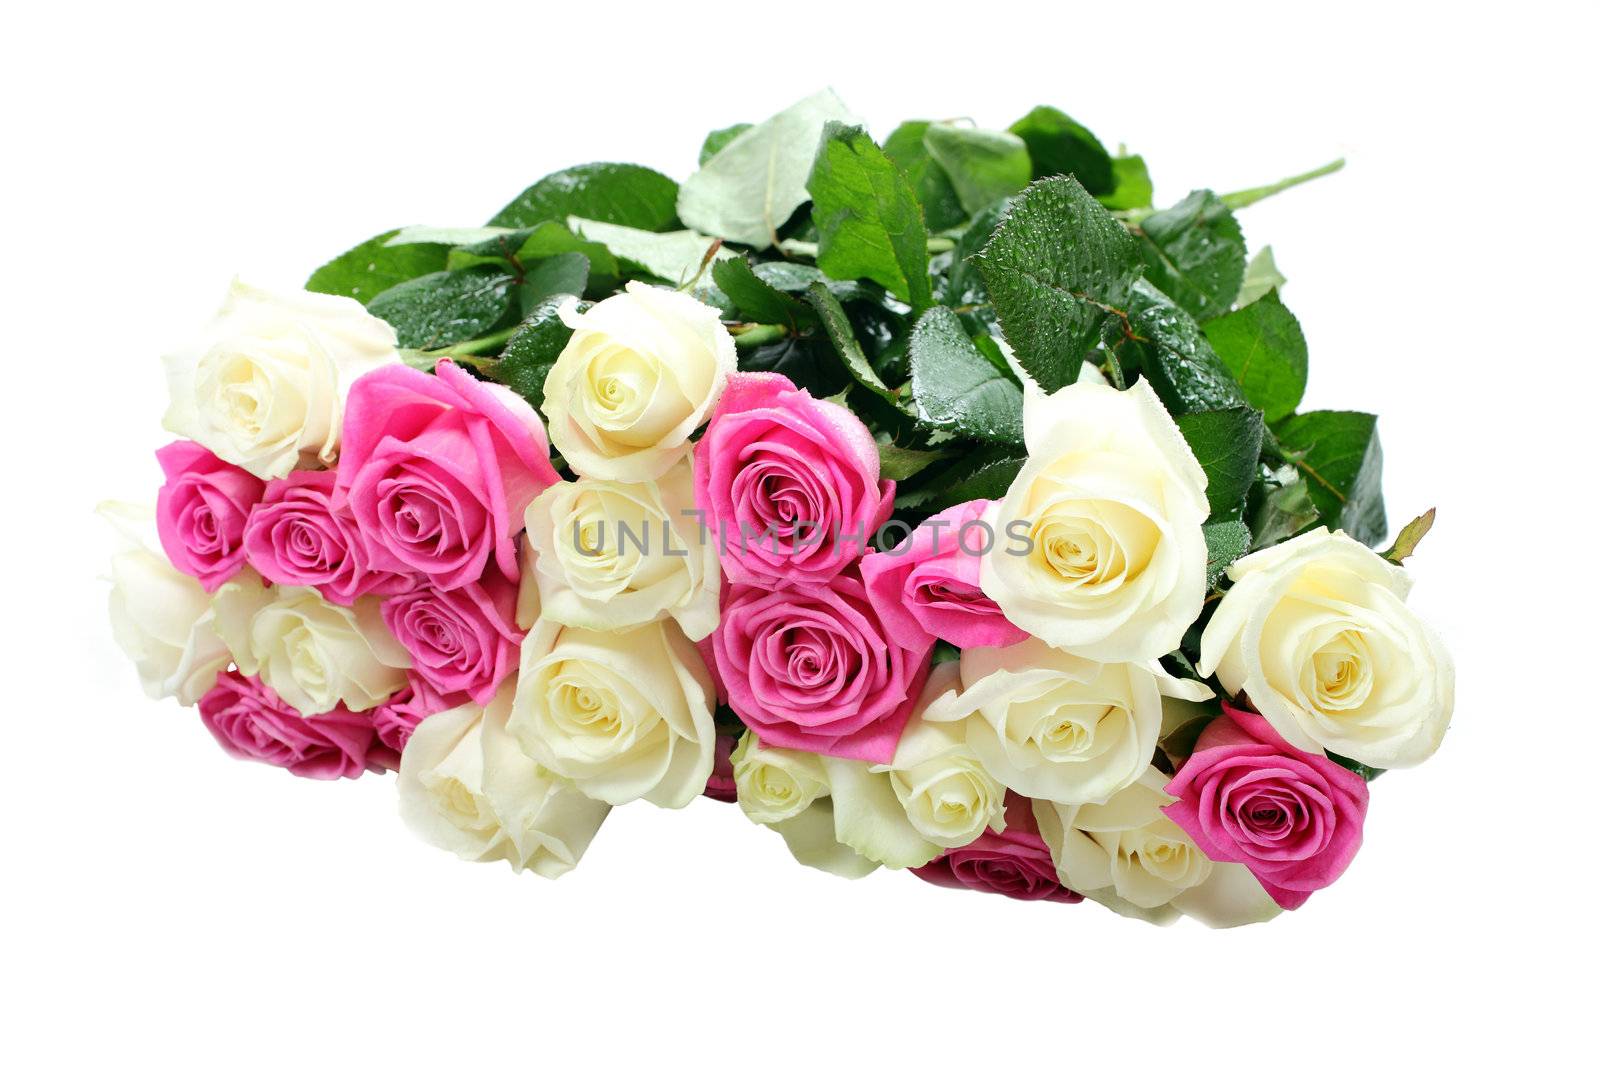 White and pink roses with water drops isolated on white background.